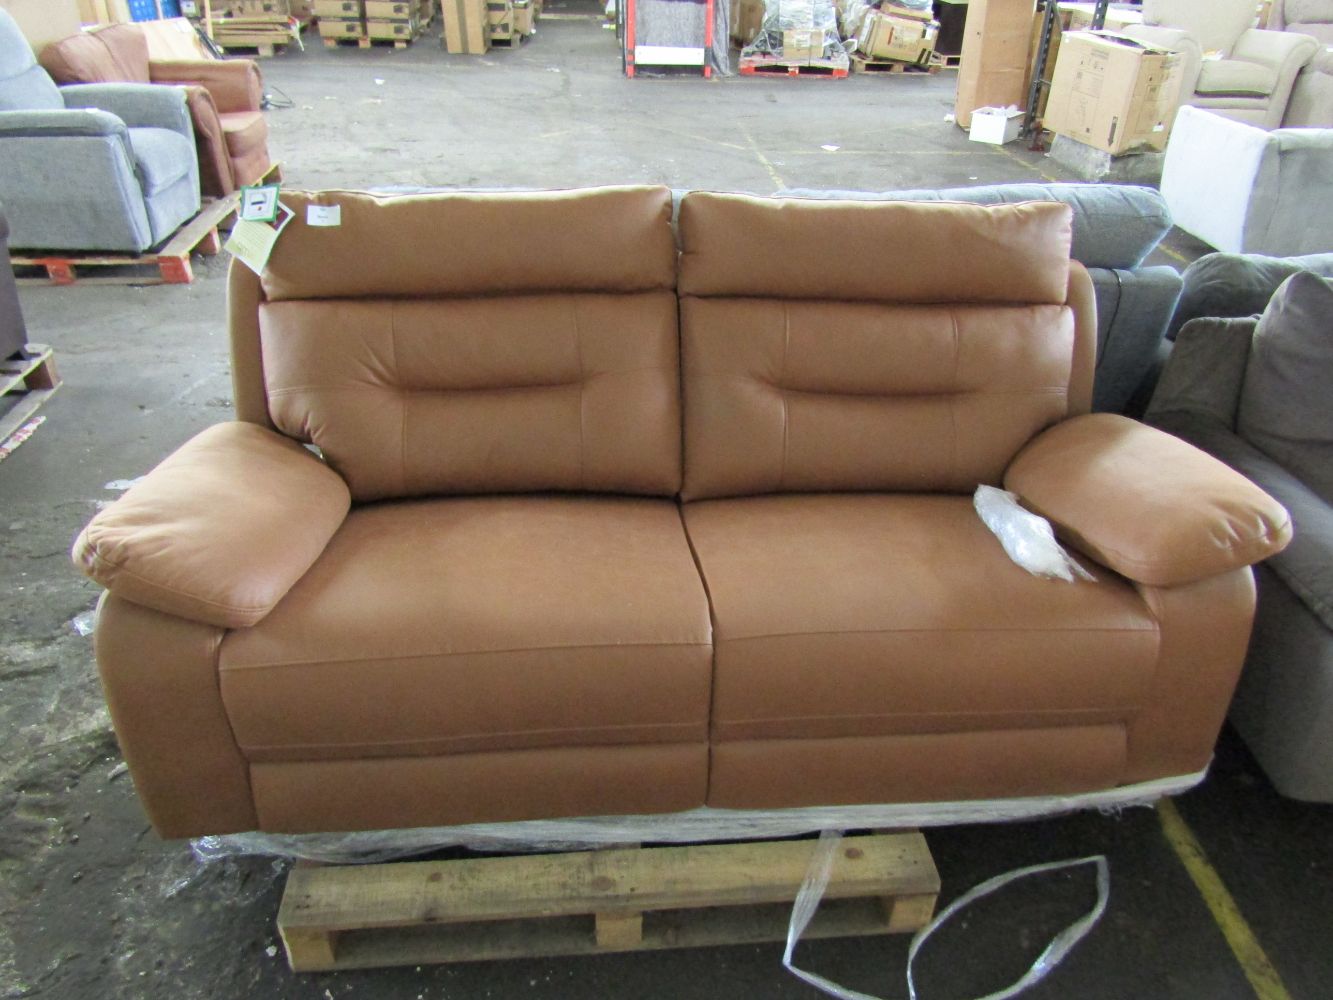 **Last Minute Reduction on Starting Bids on Sofas and chairs from SCS, Oak Furniture land, Heals and more.